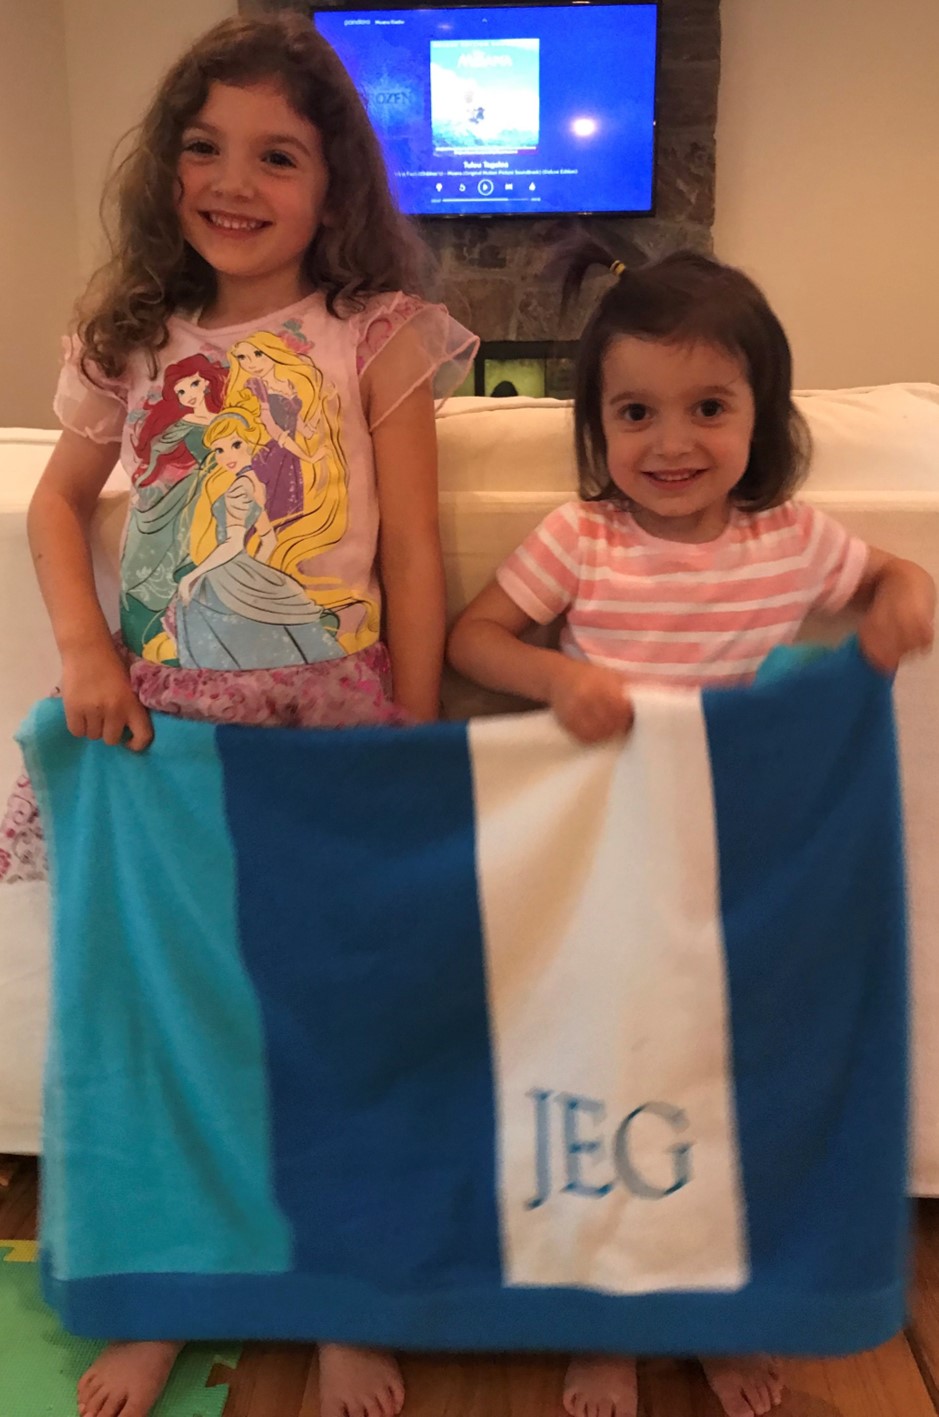 Cute kids with JEG Search towel